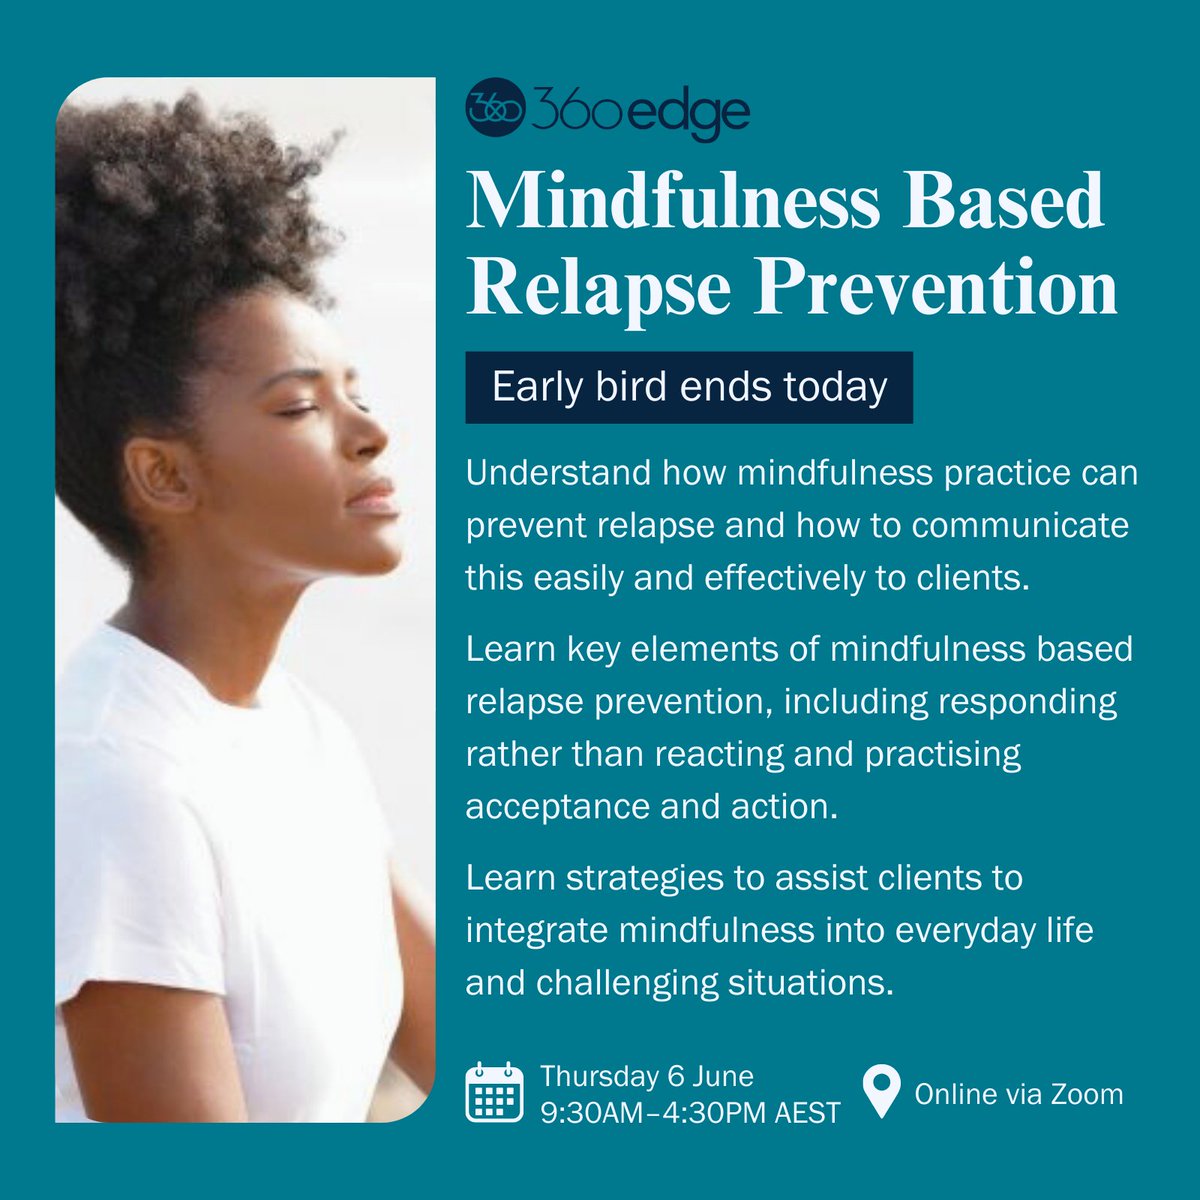 Mindfulness based relapse prevention (MBRP) integrates traditional relapse prevention with mindfulness meditation practices. With this brand new workshop, you will learn how to easily adapt MBRP to suit individual clients’ needs. Book today and save 15%: bit.ly/3OA5zUQ